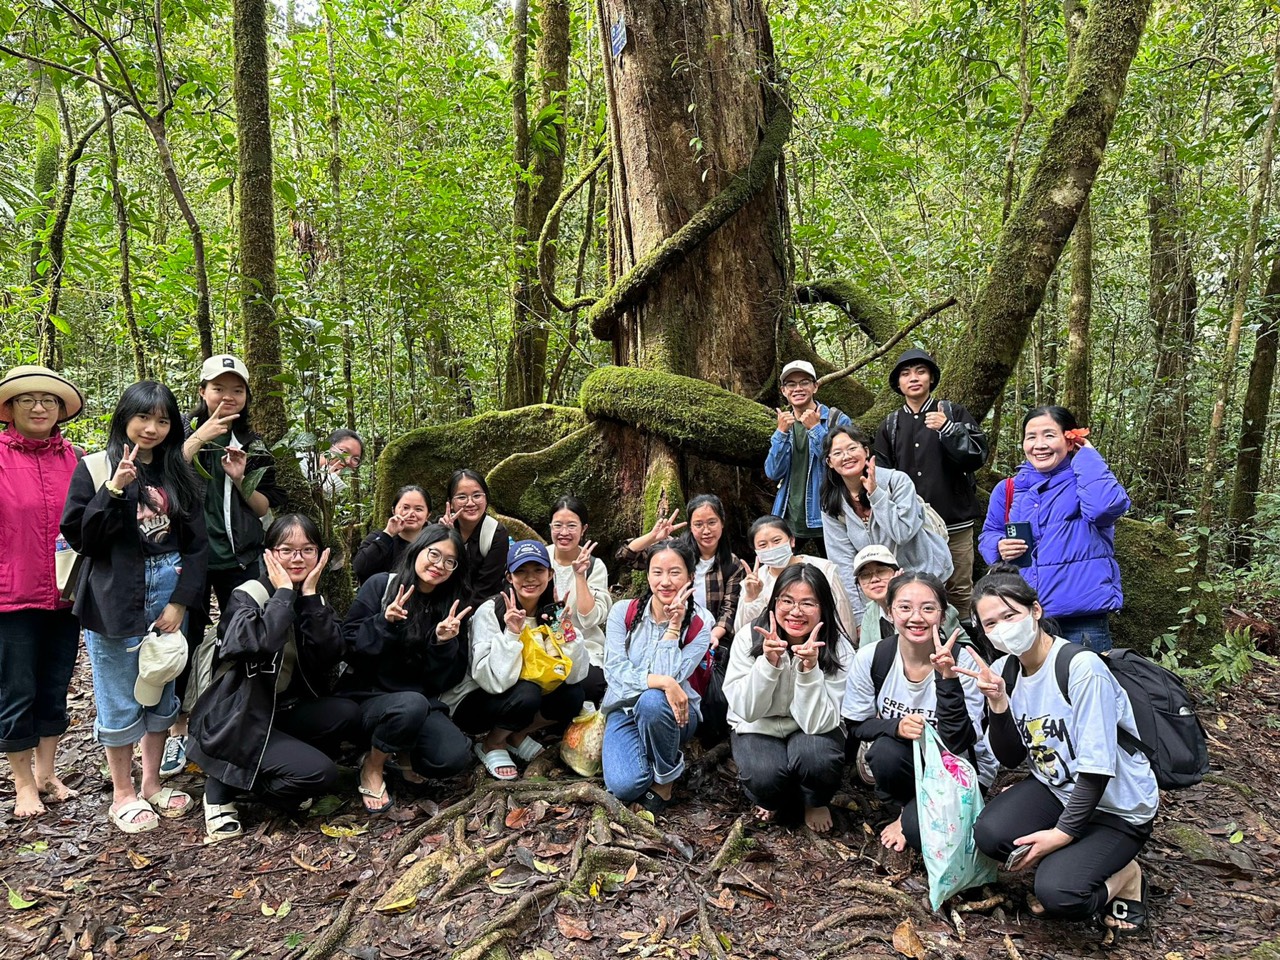 A group of people posing for a photo in the woodsDescription automatically generated